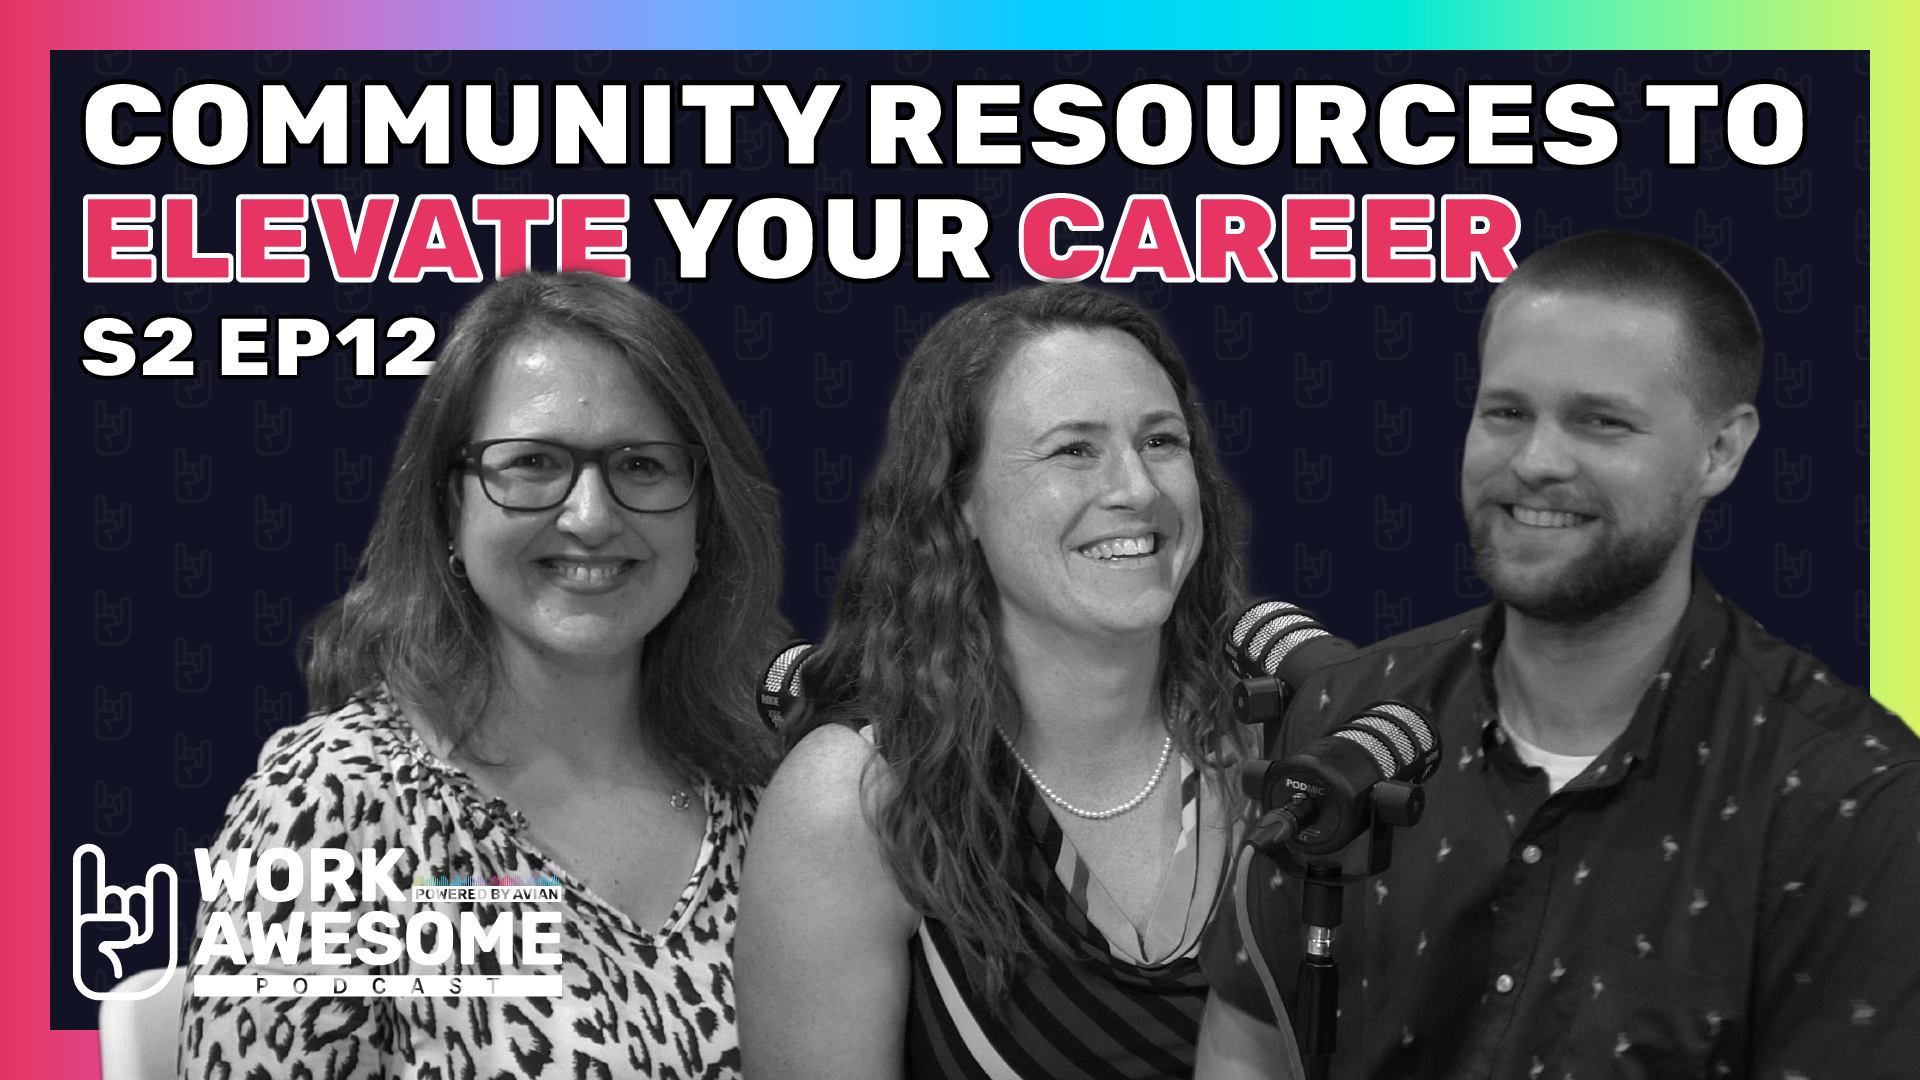 Community Resource to Elevate Your Career